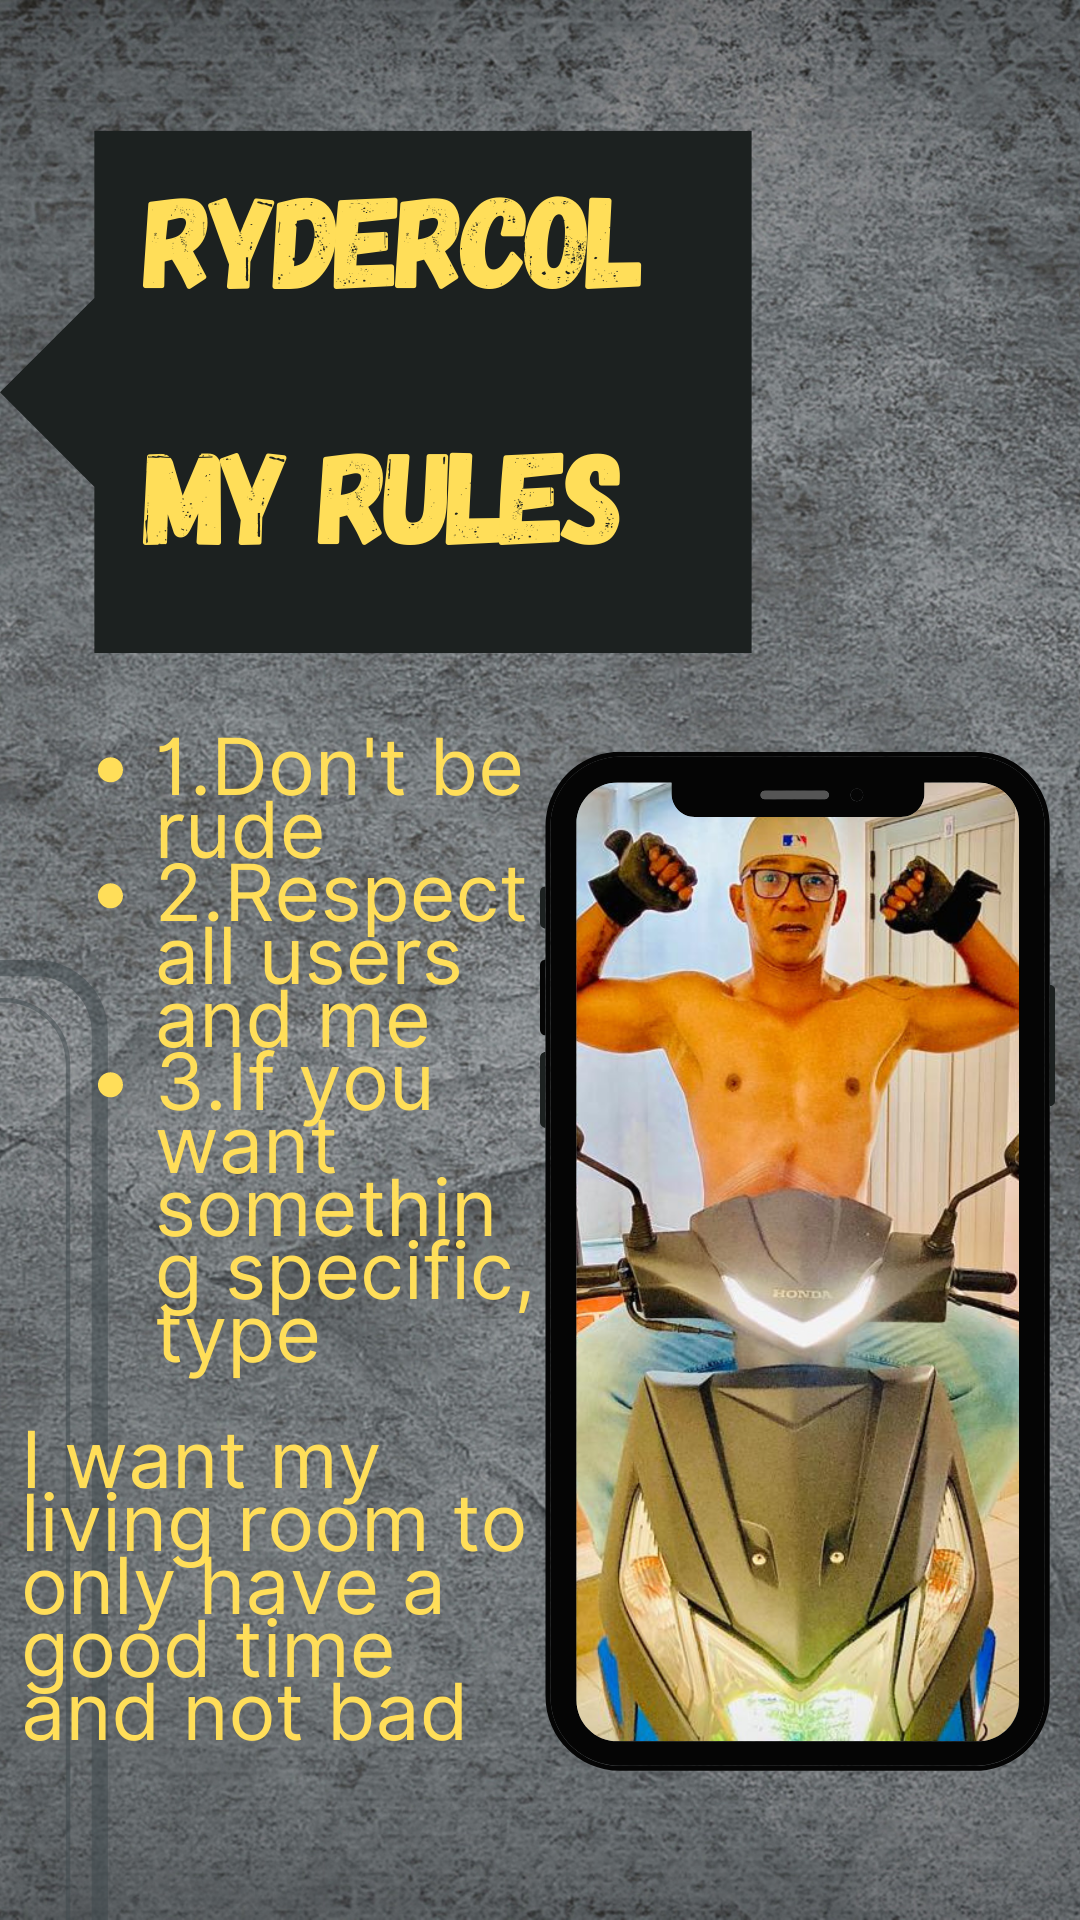 rydercol My rules image: 1